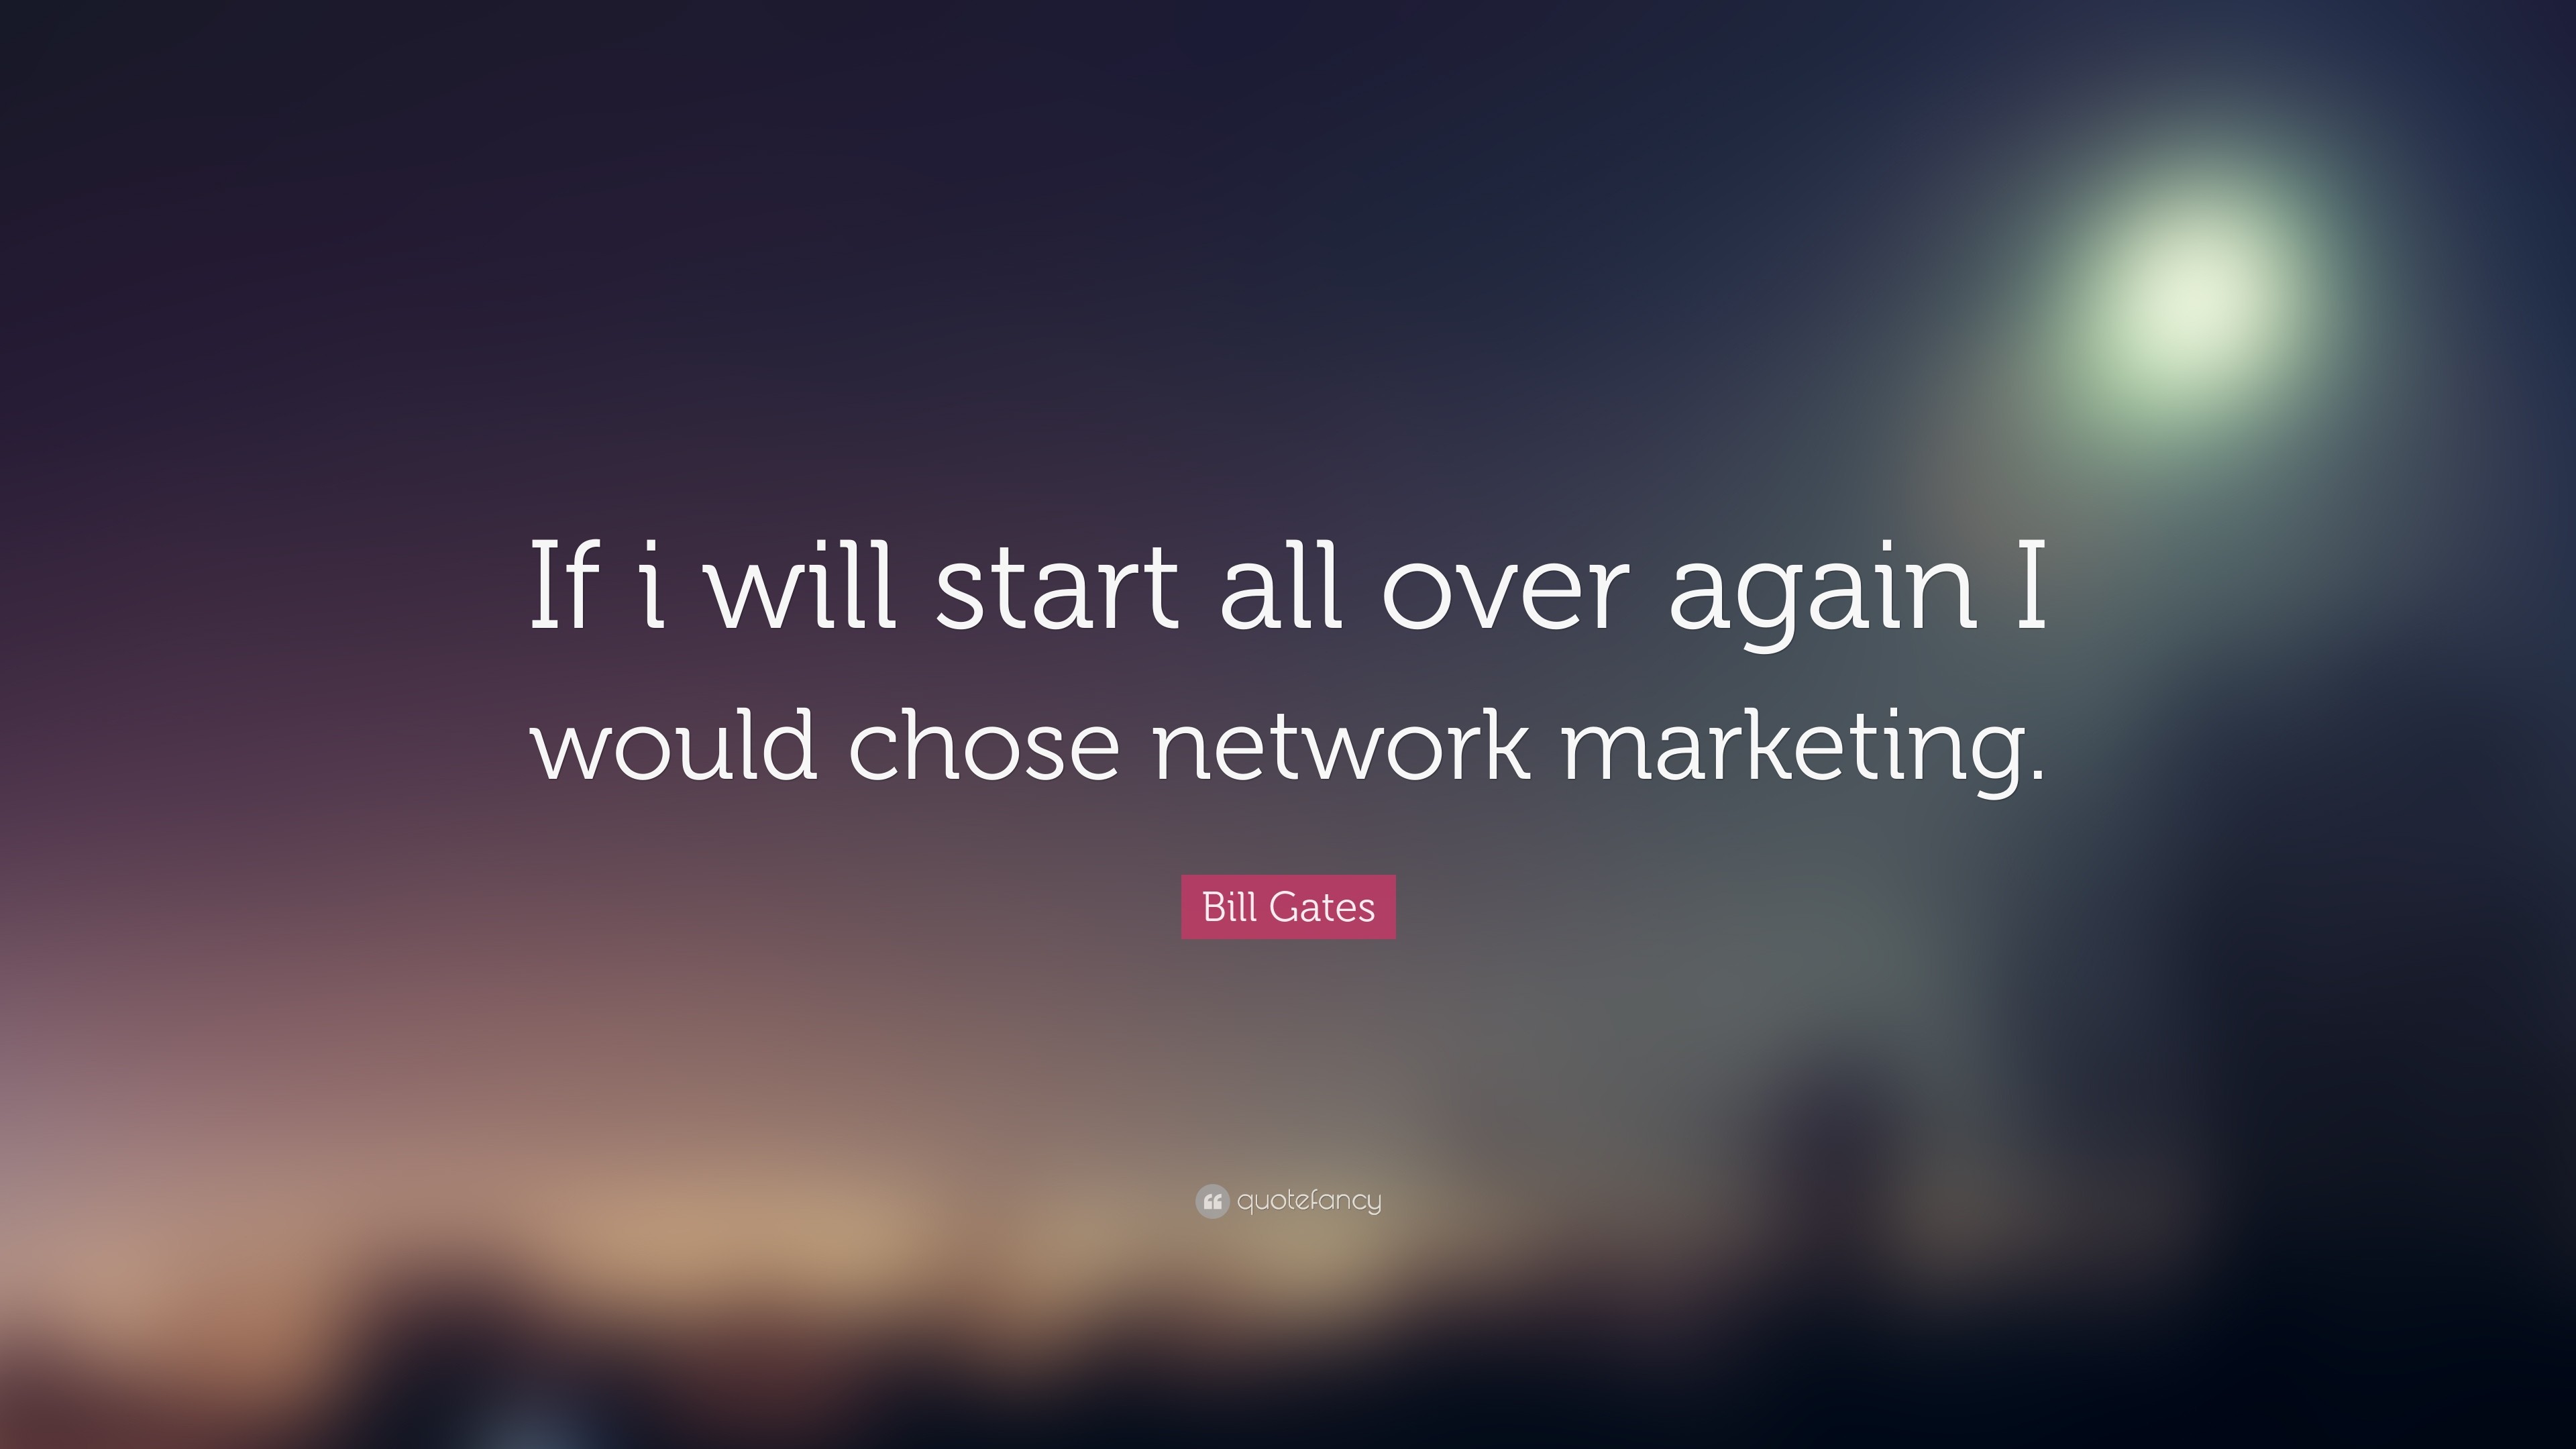 3840x2160 Marketing Quotes: “If i will start all over again I would chose network  marketing